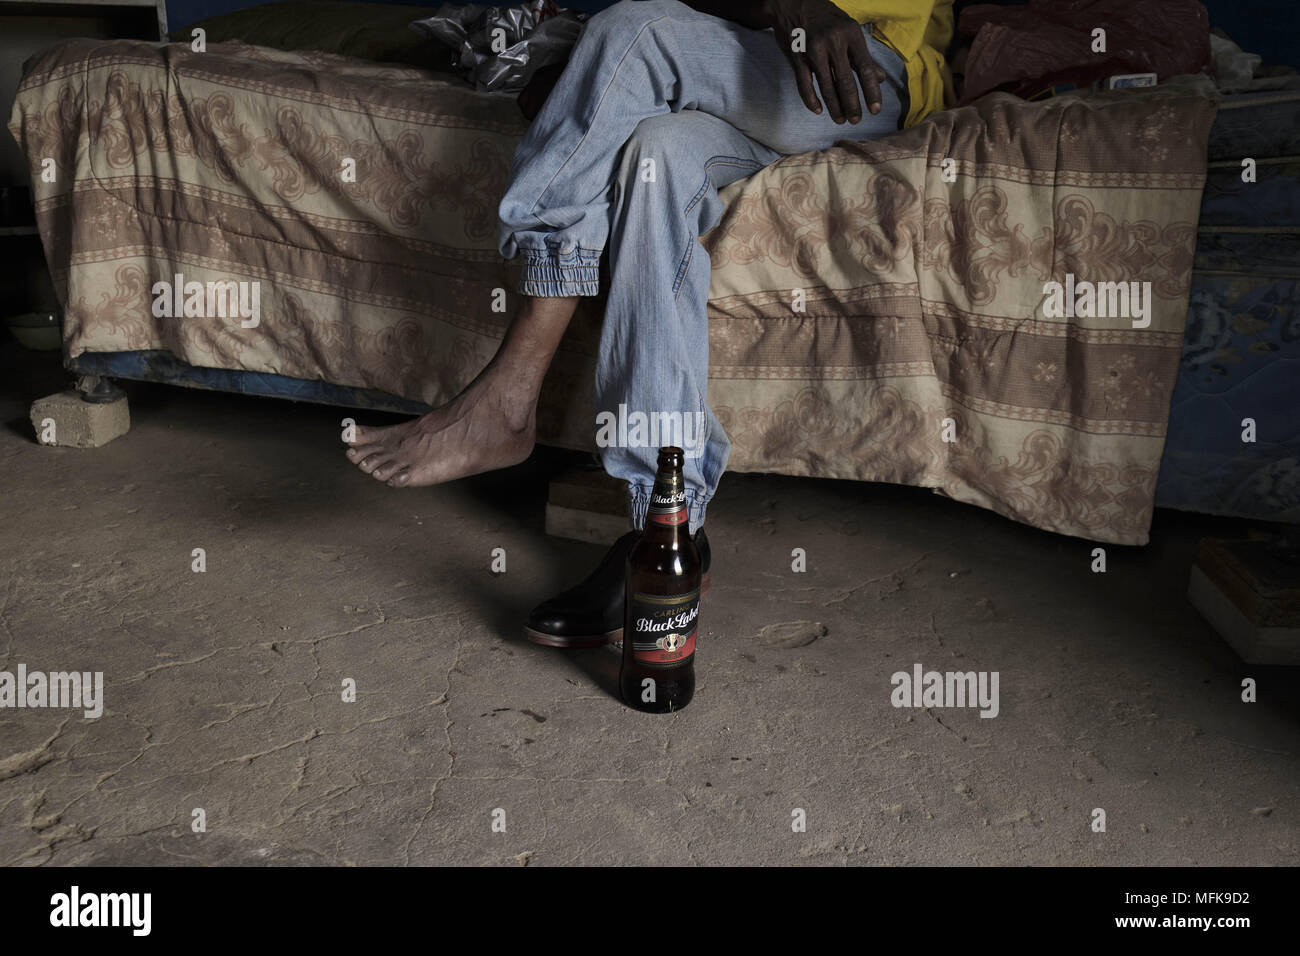 January 12, 2018 - Matatiele, Eastern Cape, South Africa - Alcohol consumption at the Eastern Cape plays a big part of daily life. (Credit Image: © Stefan Kleinowitz via ZUMA Wire) Stock Photo